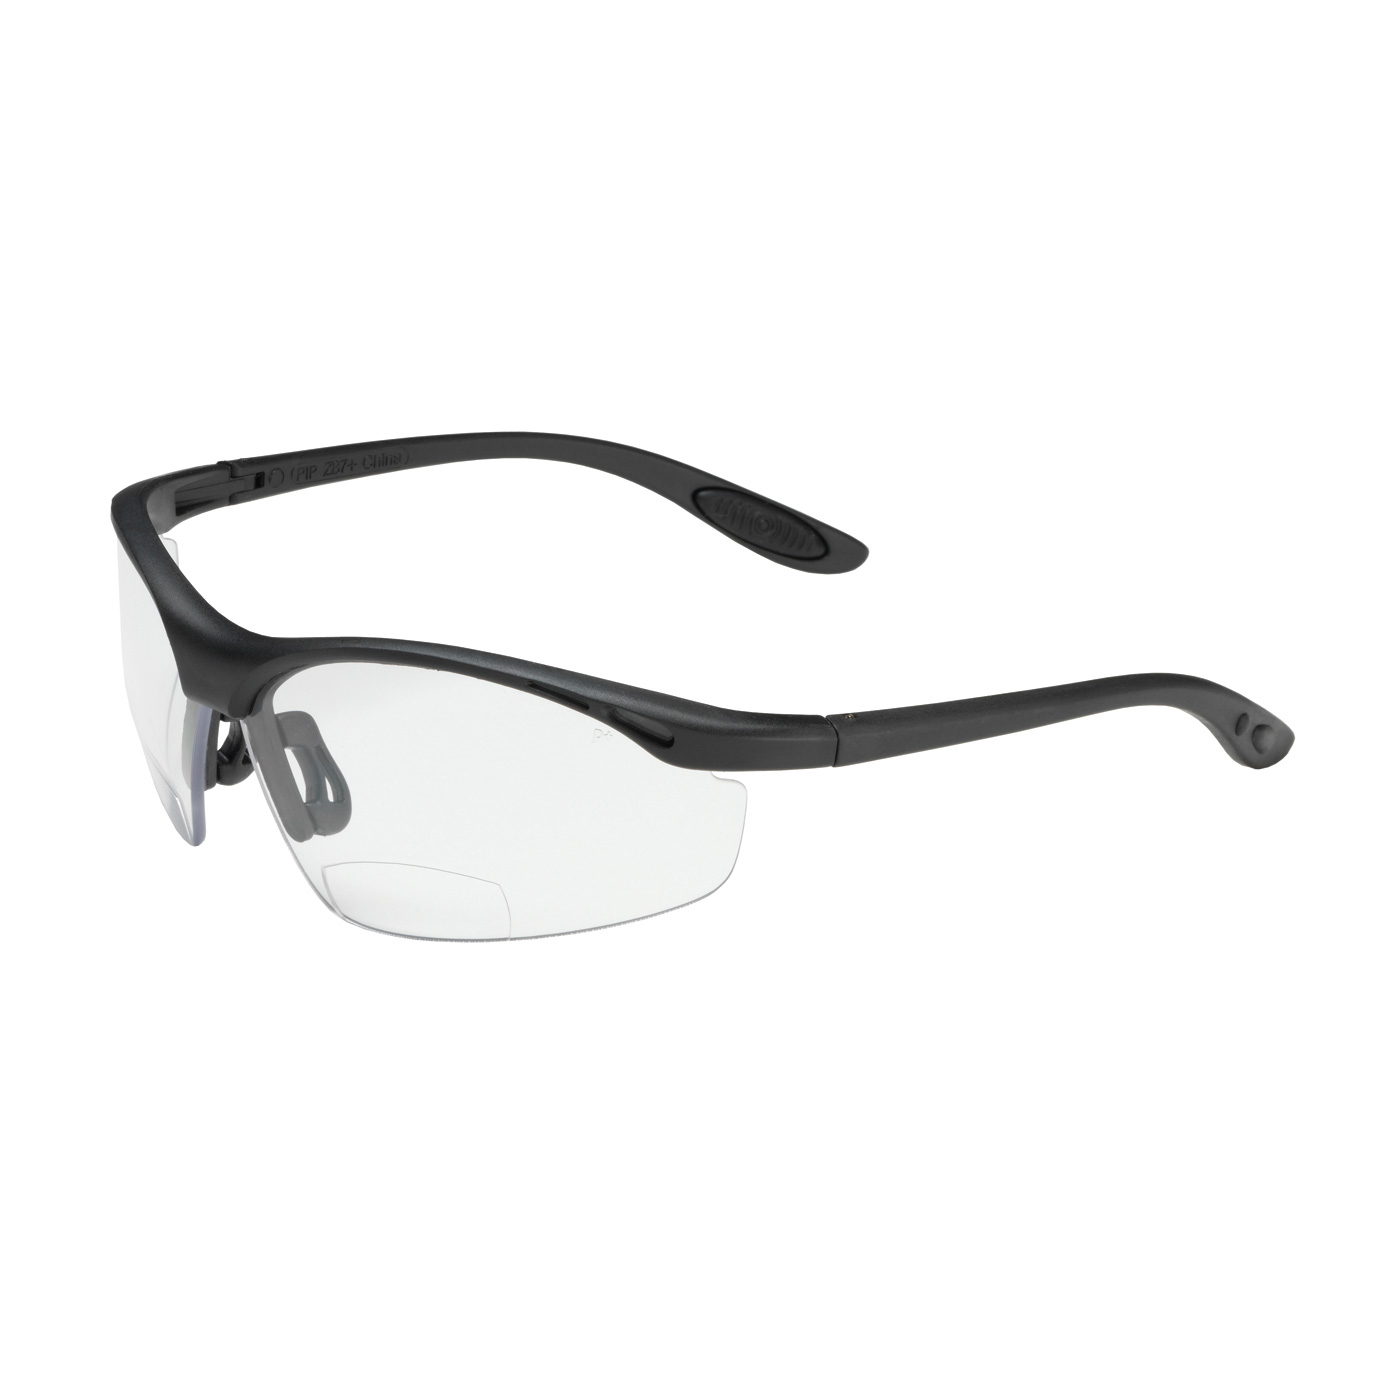 Mag Readers Semi-Rimless Safety Readers 1.5 Diopter